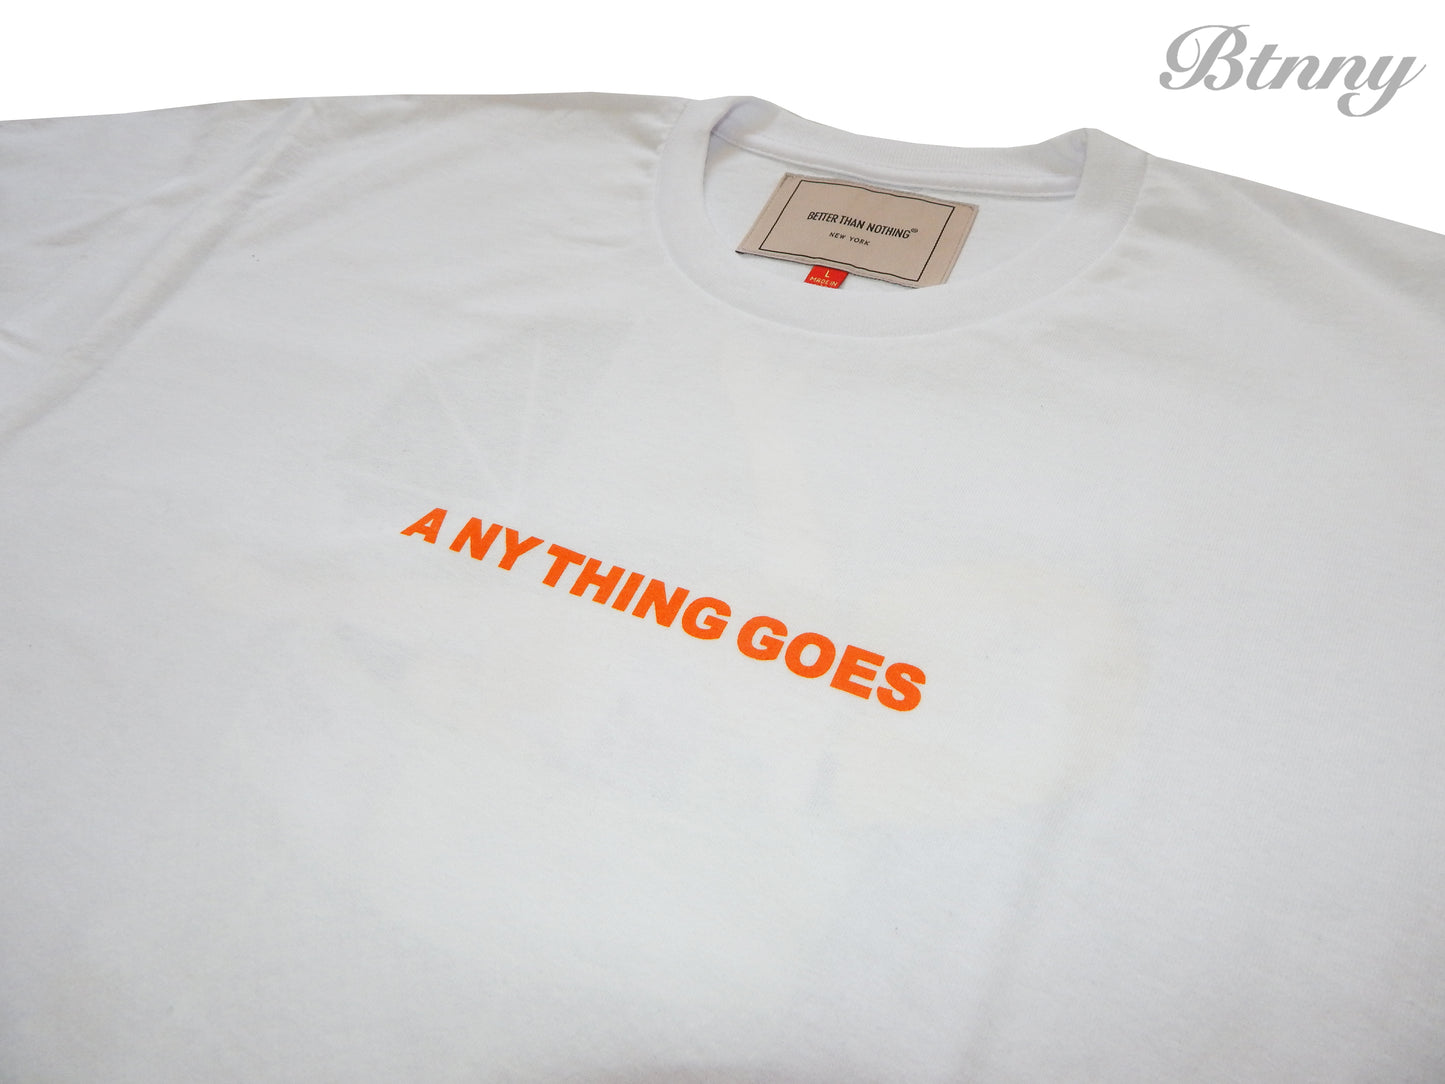 ANYTHING GOES S/S T-Shirts